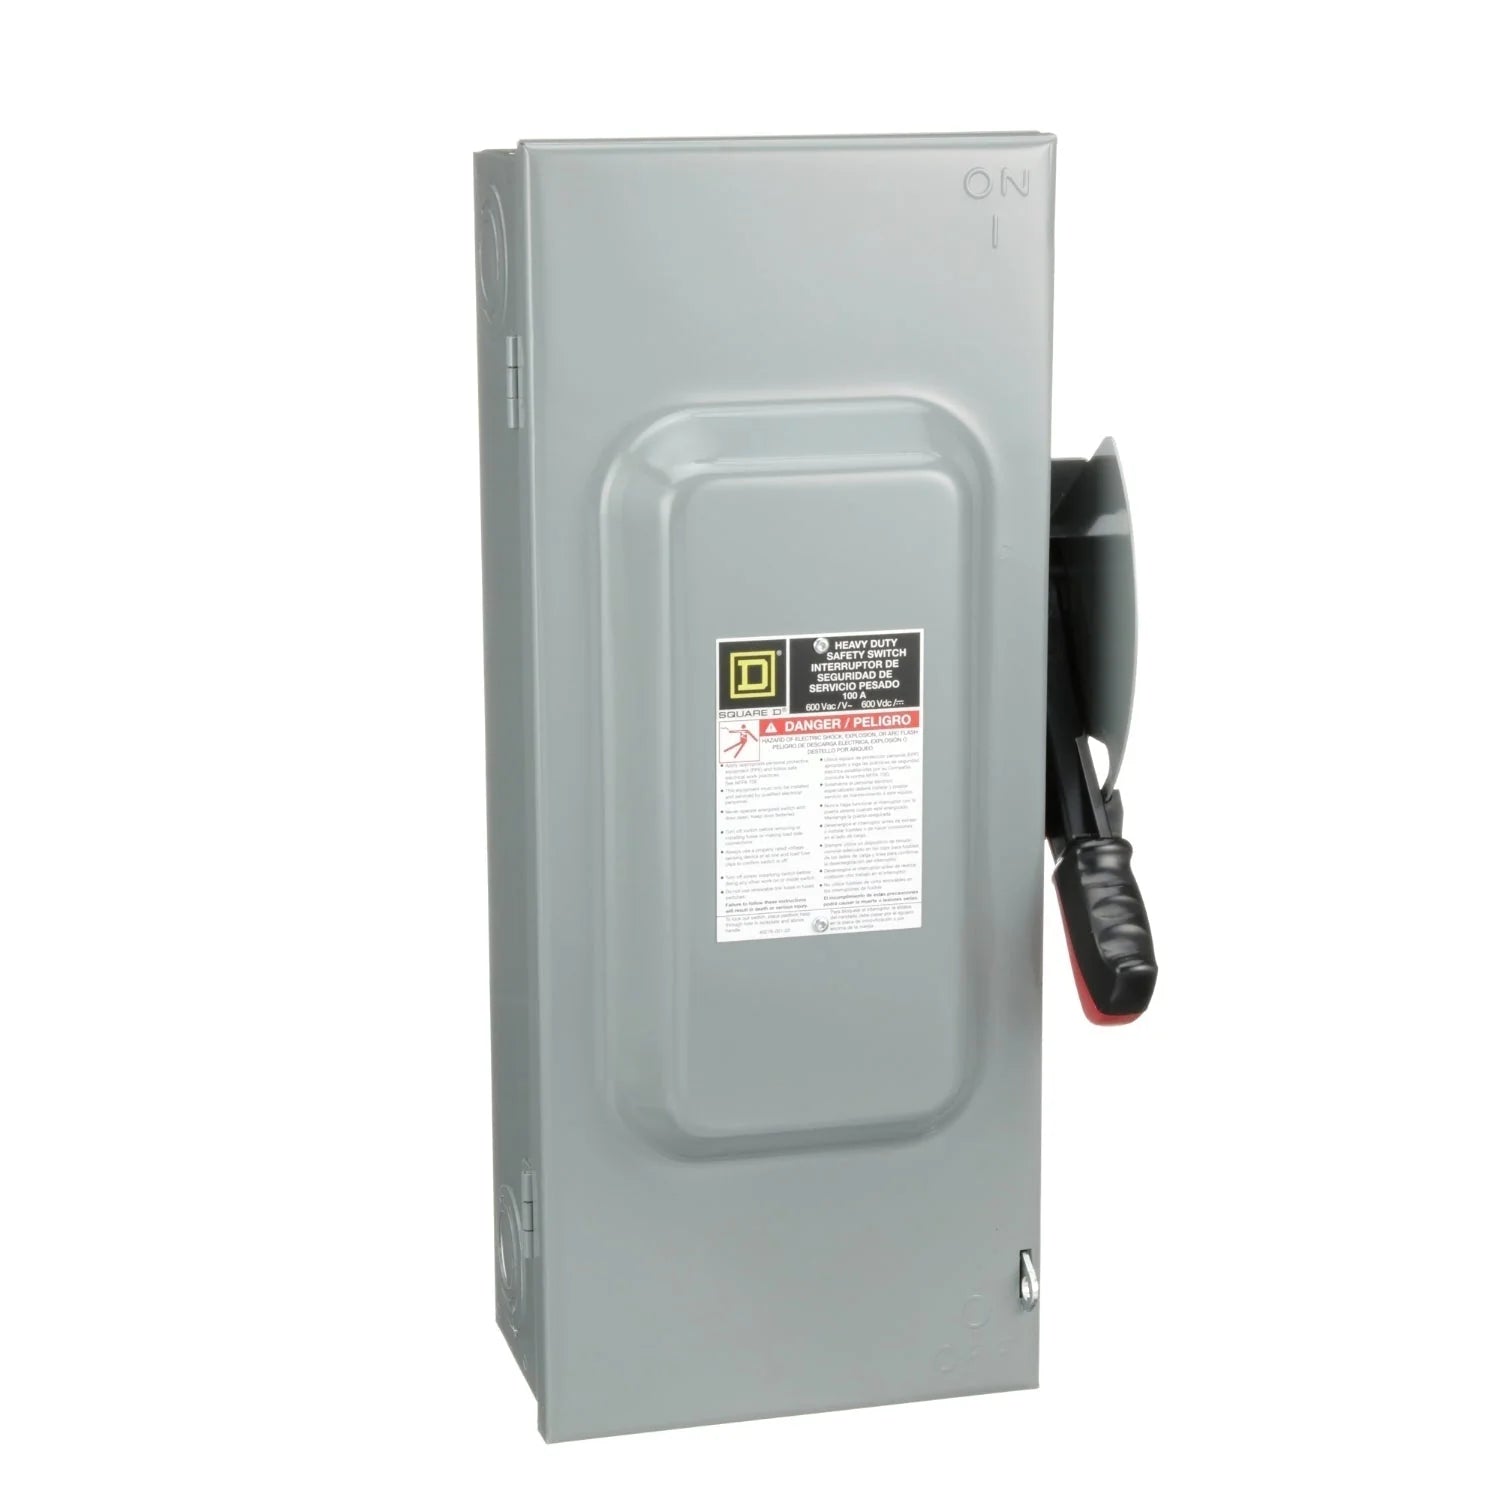 H363N | Schneider Electric 100 Amp Disconnect and Safety Switch